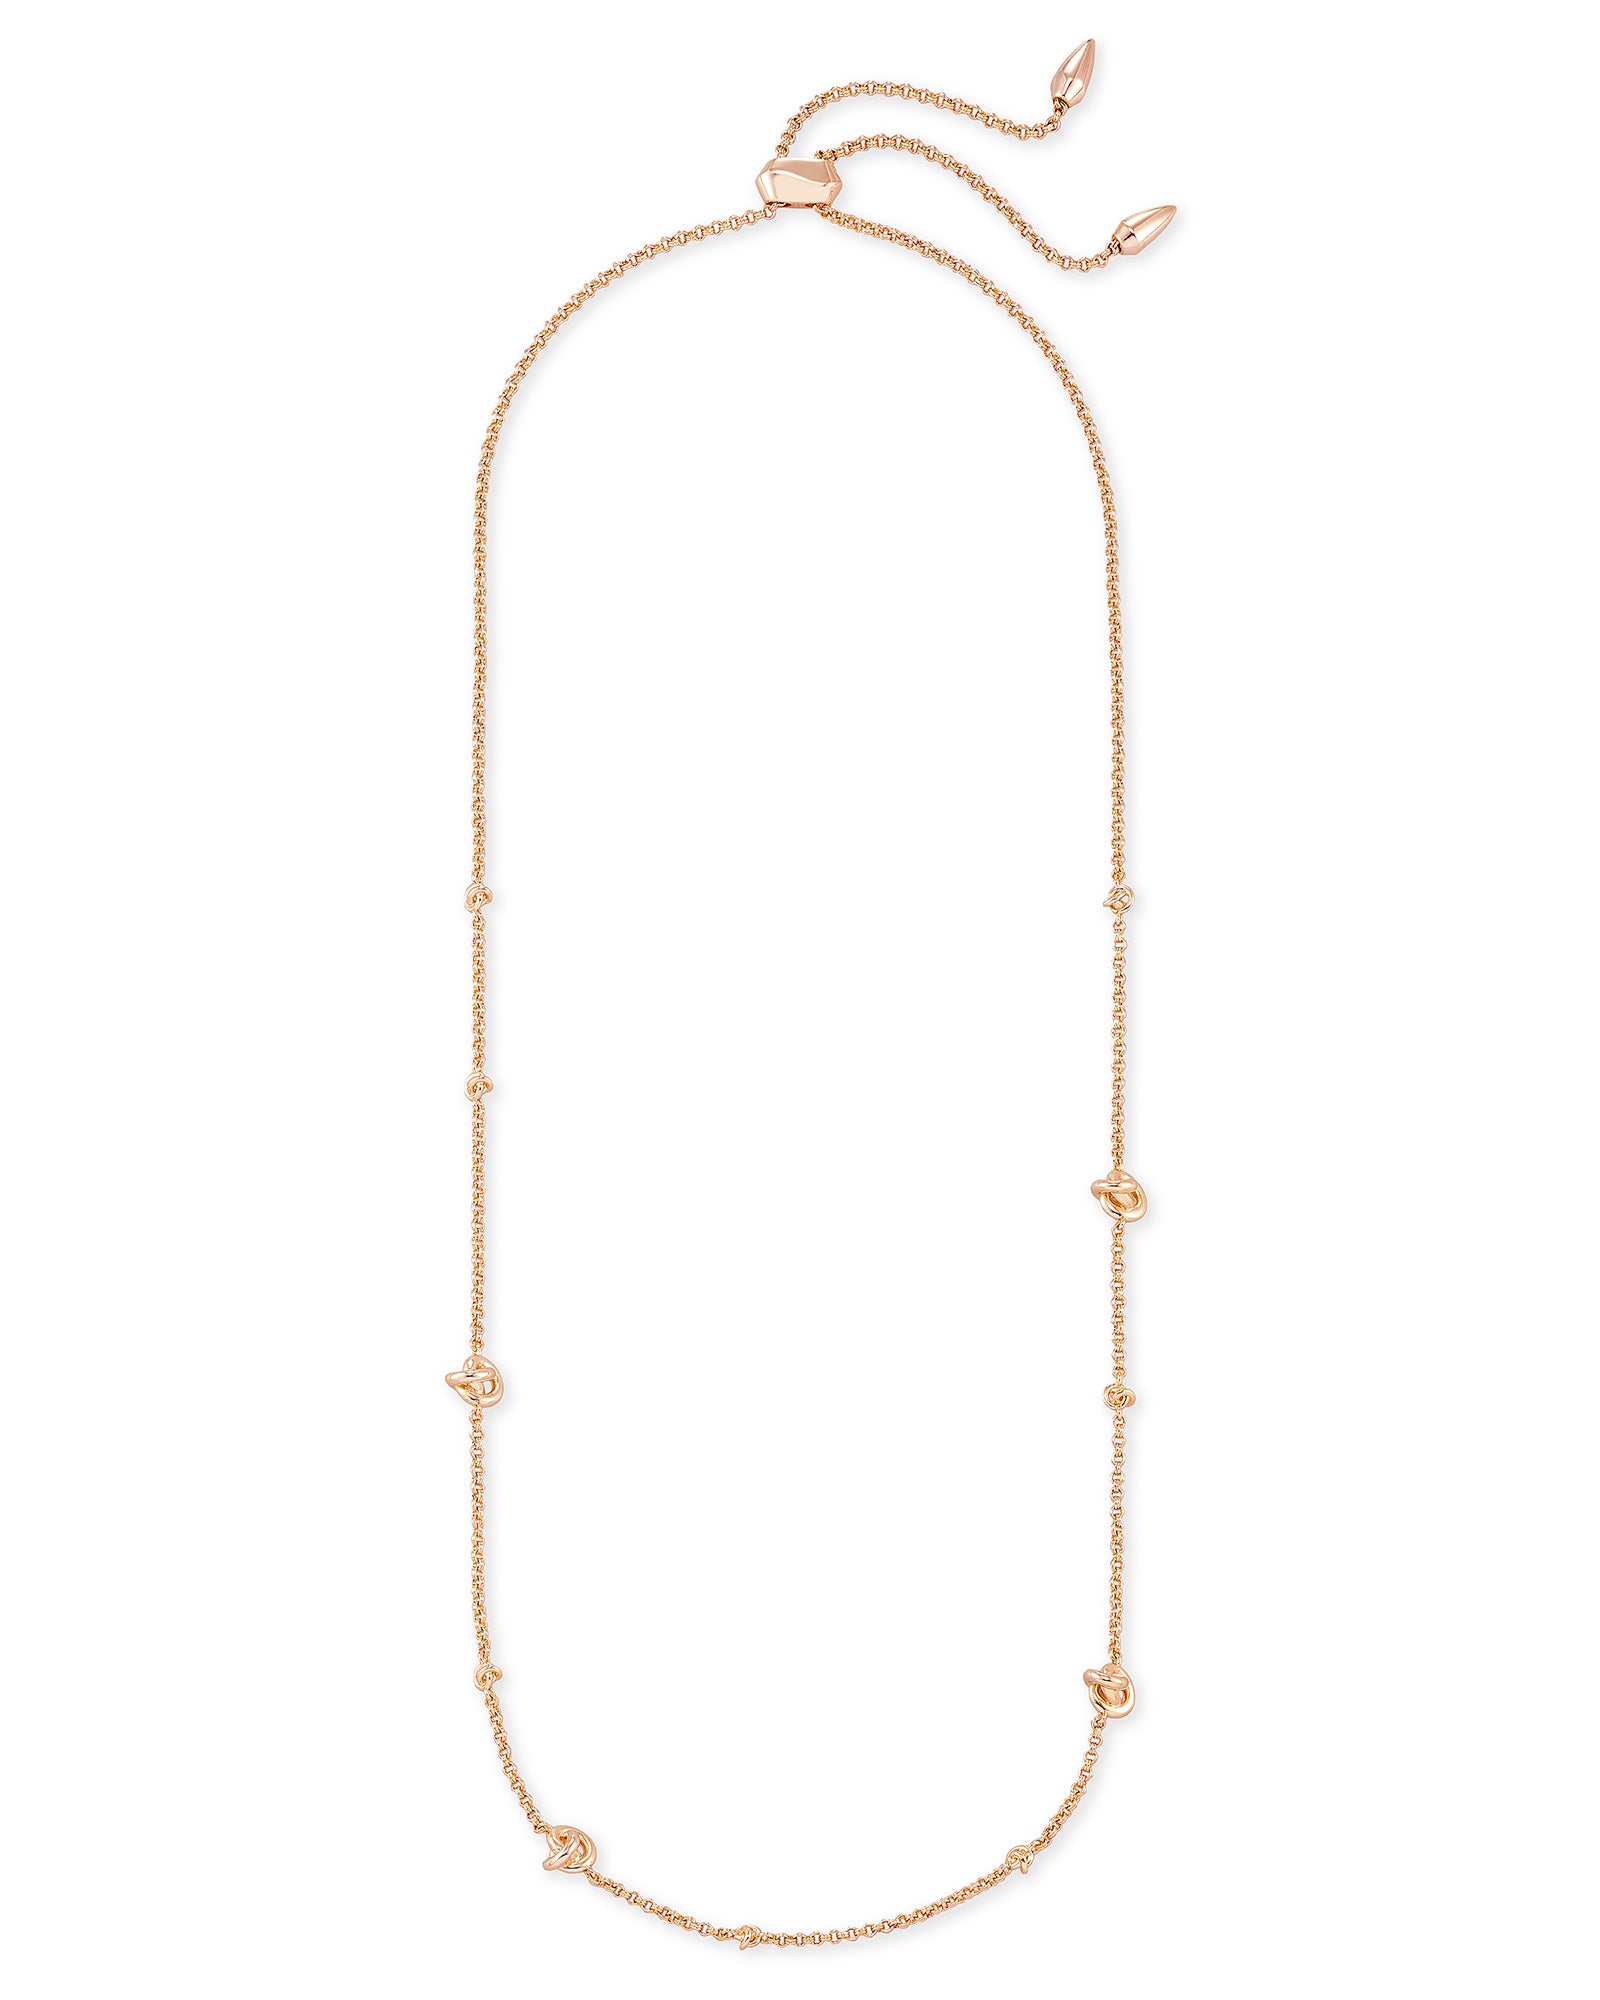 Presleigh Short Stand Necklace in Rose Gold